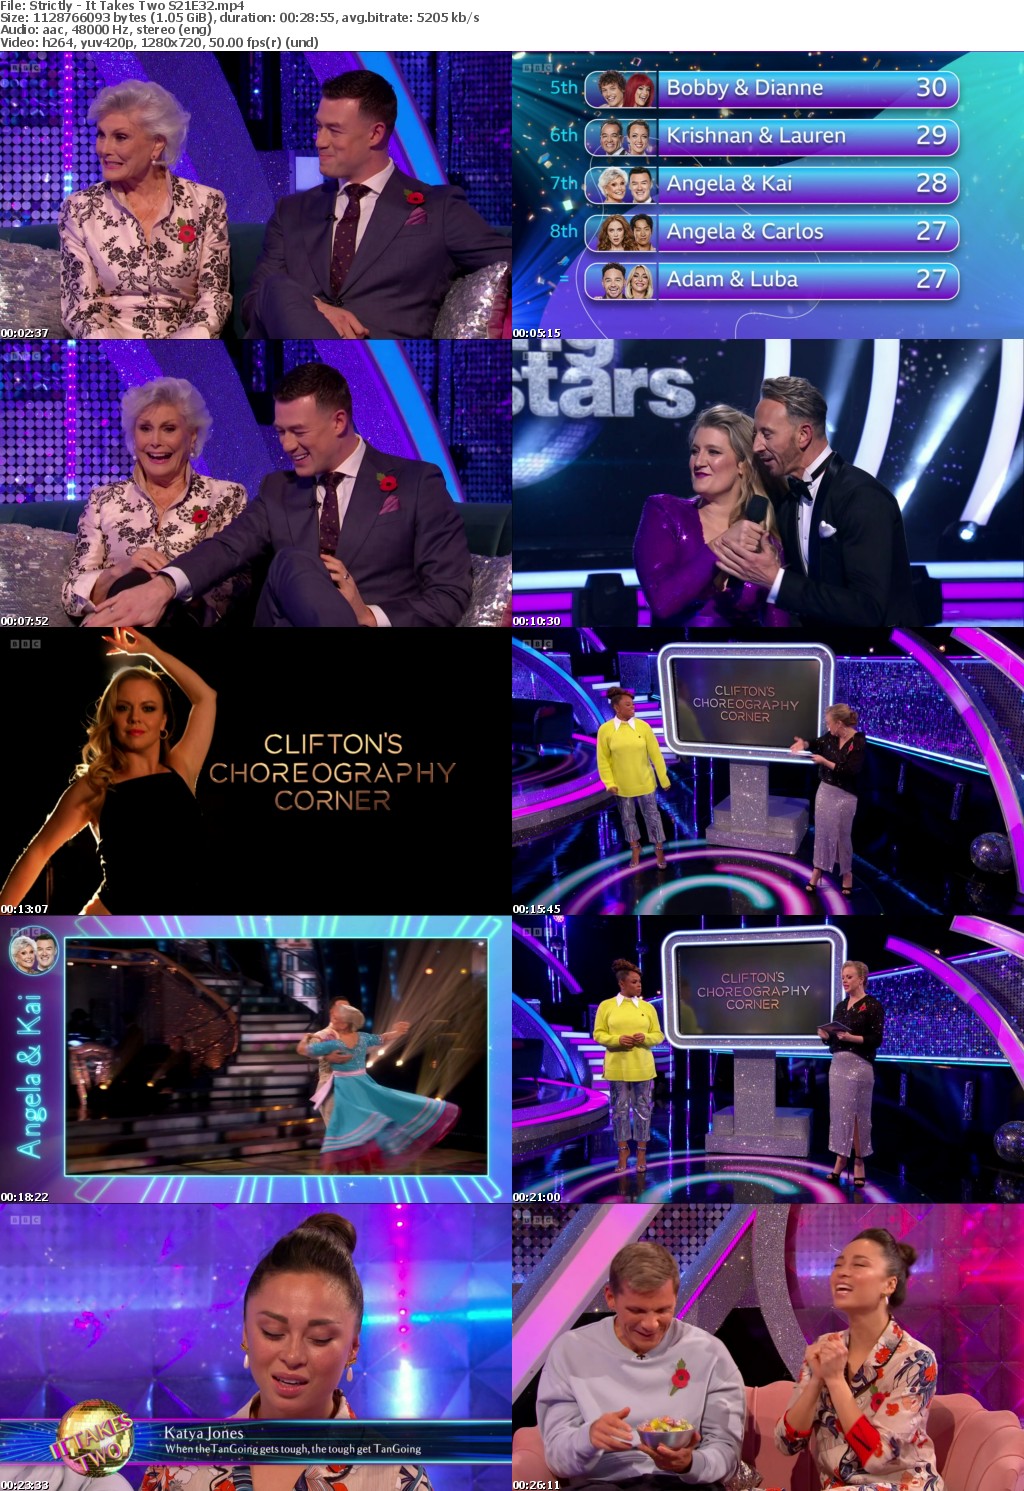 Strictly - It Takes Two S21E32 (1280x720p HD, 50fps, soft Eng subs)